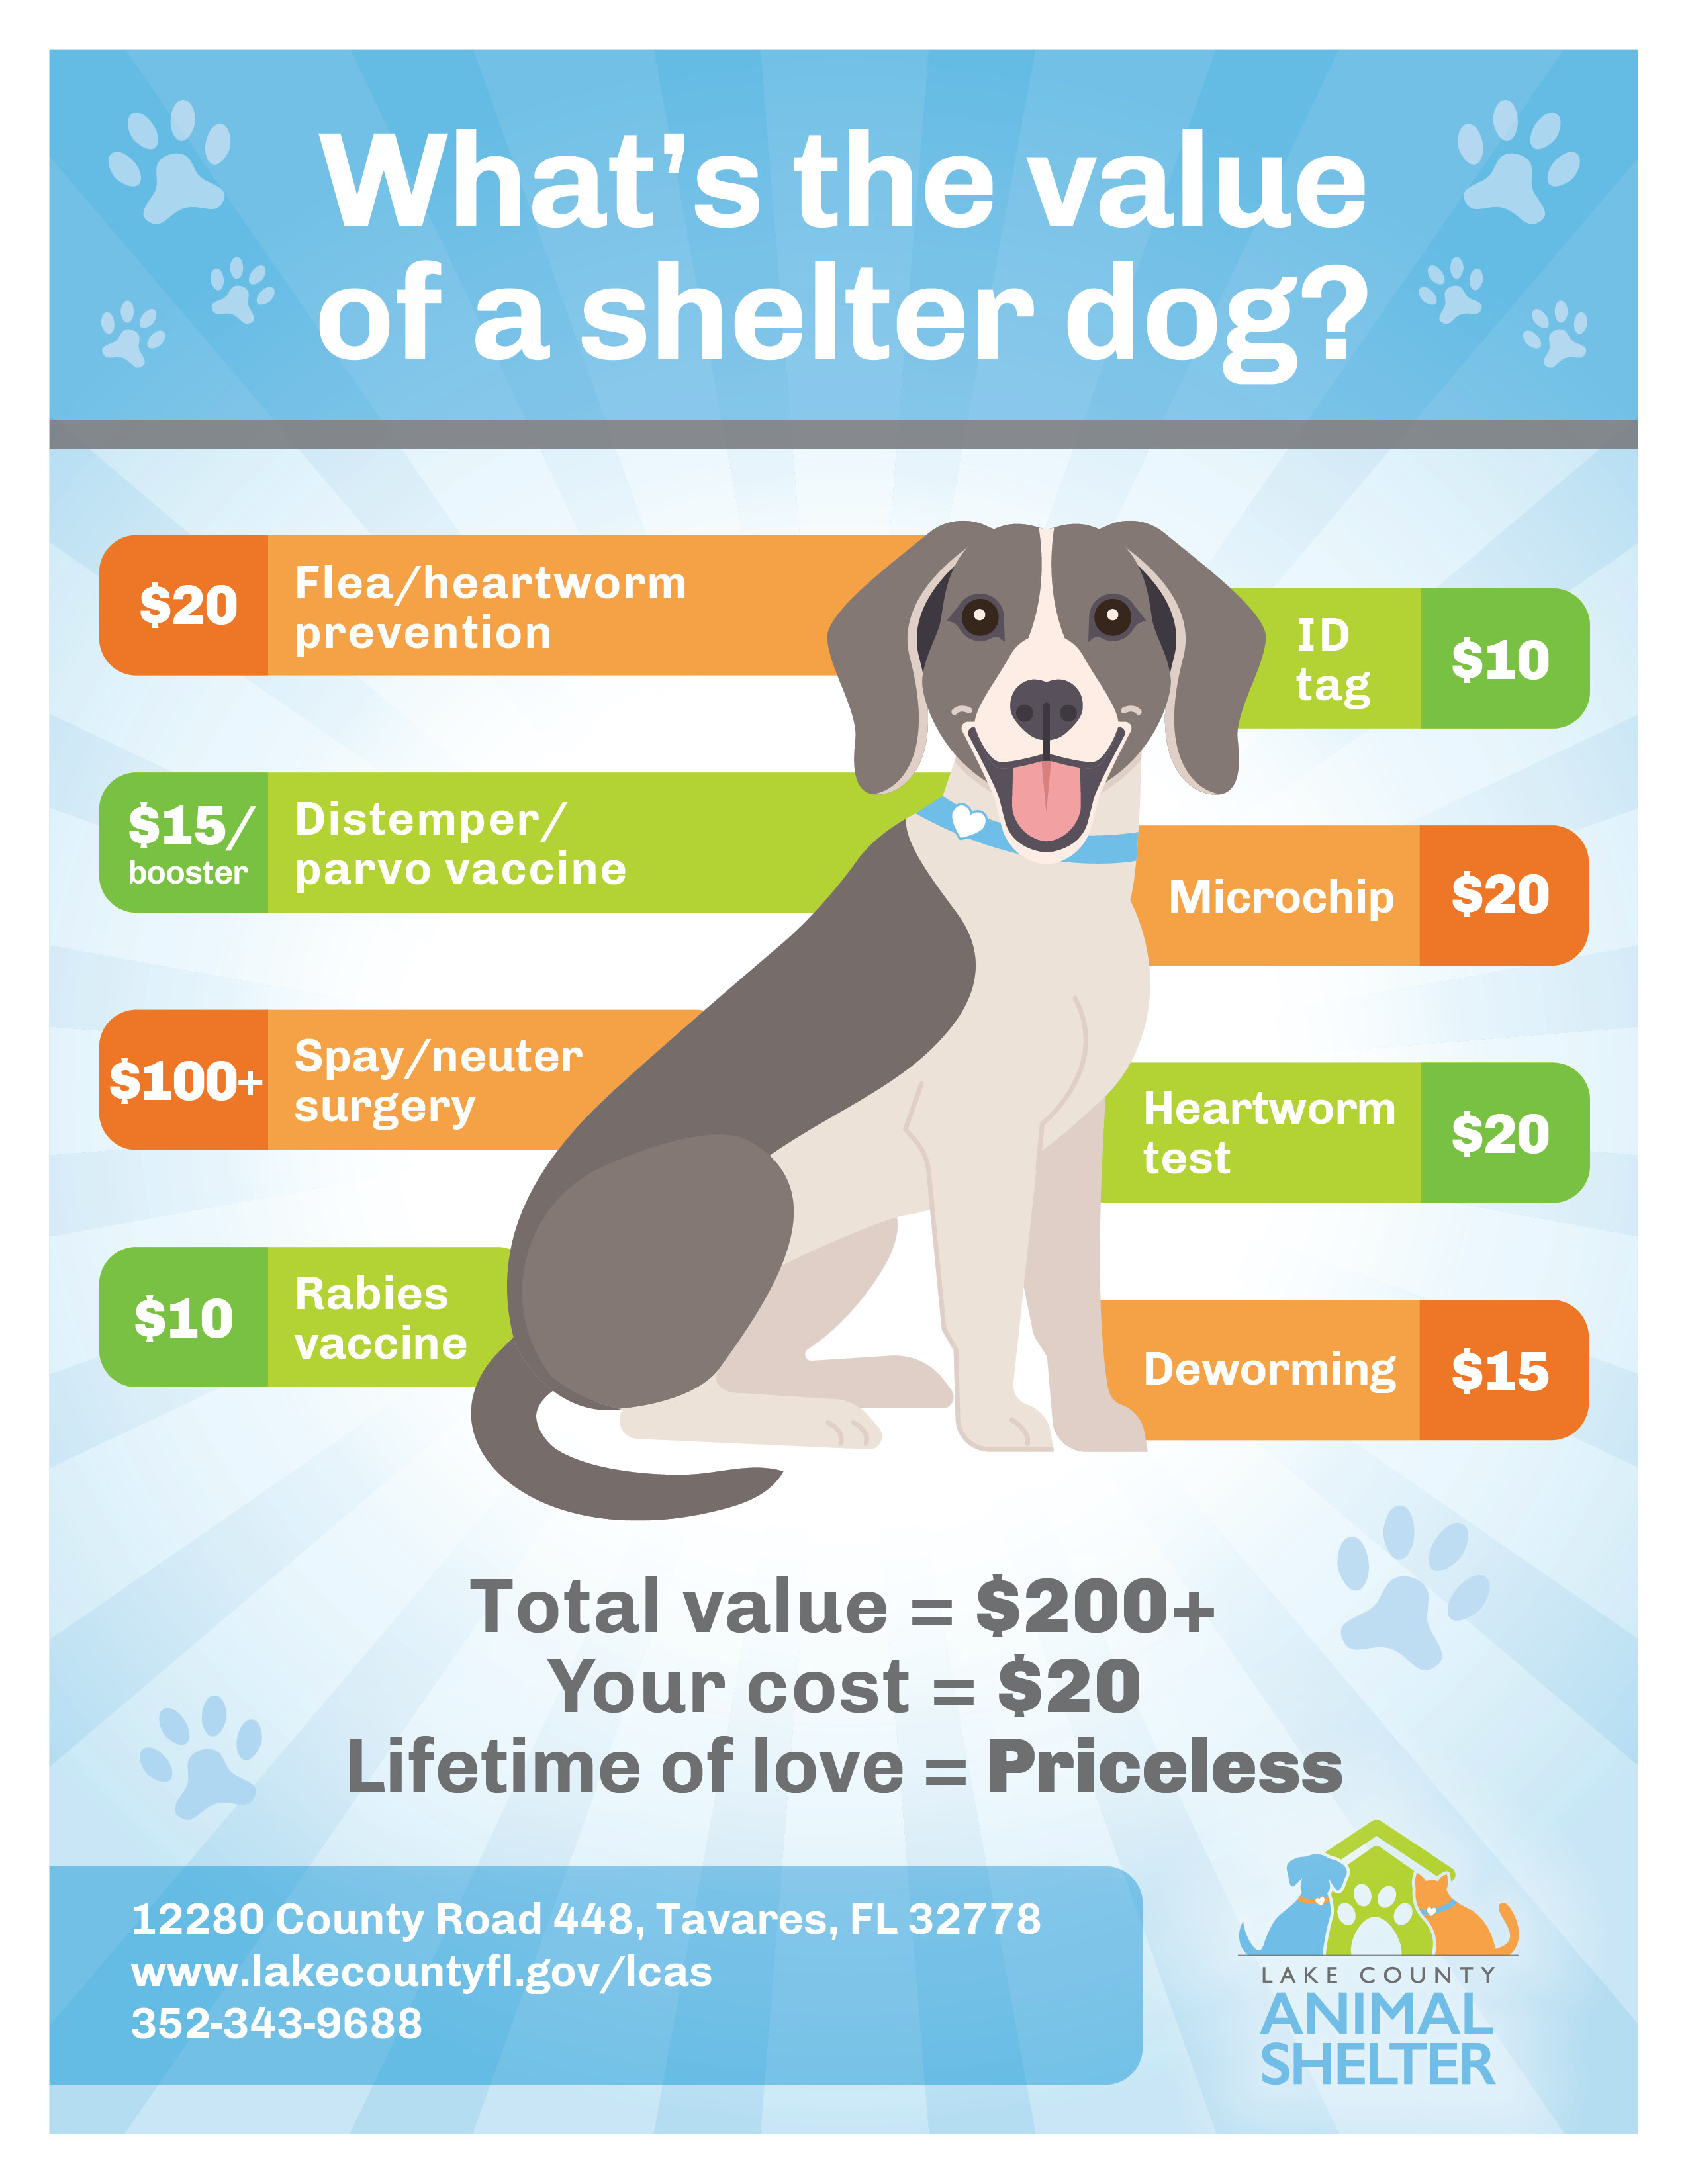 II. How to Choose the Right Shelter for Adoption